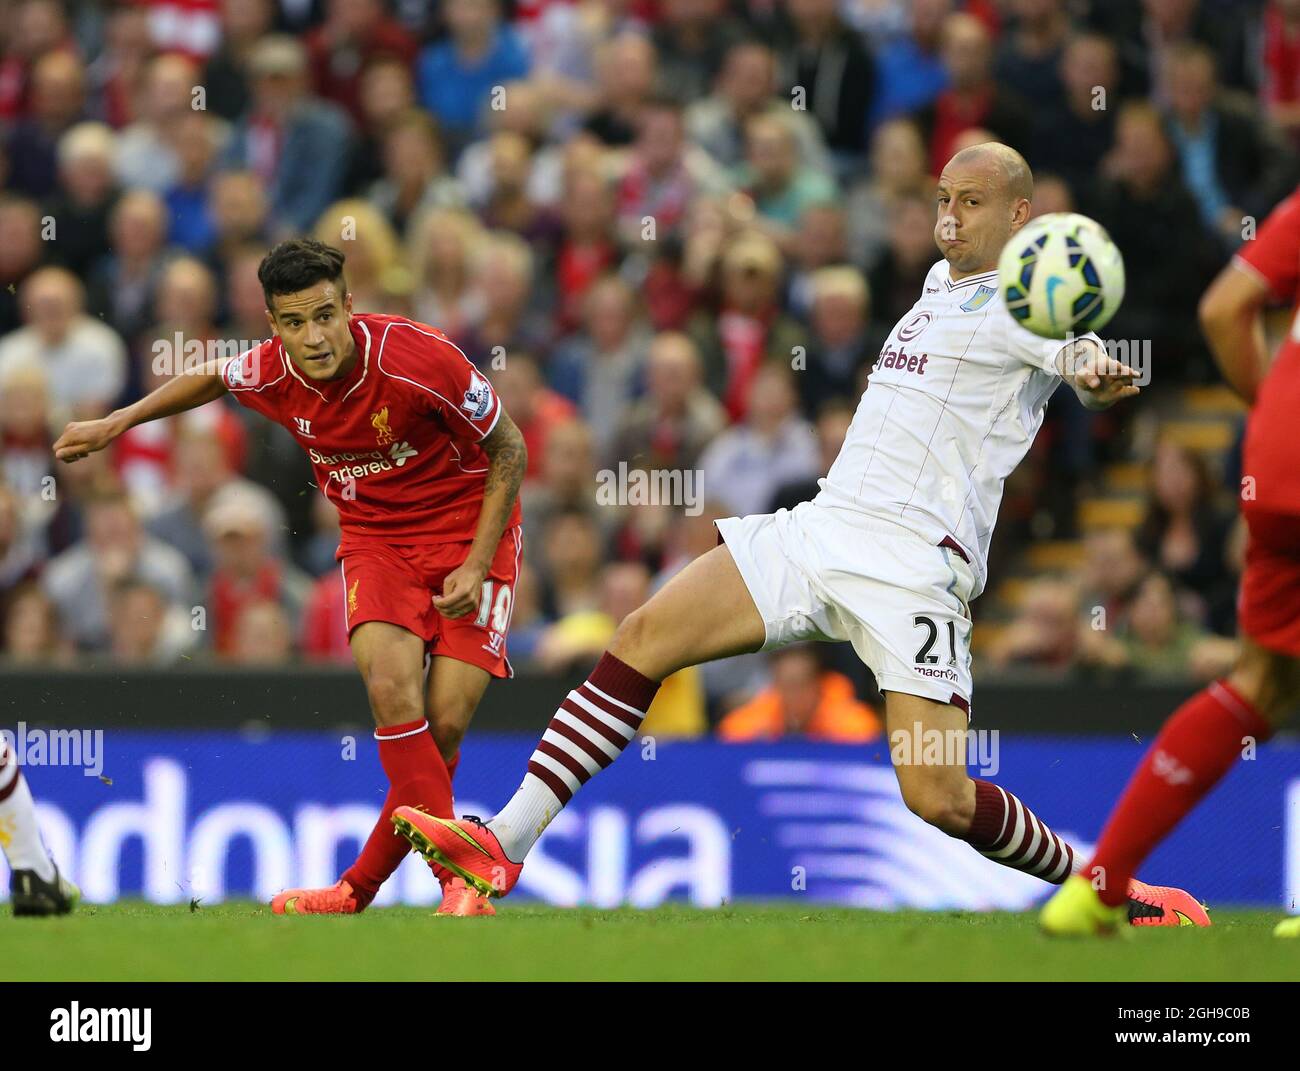 Philippe Coutinho of Liverpool fires in a shot during their English Premier League soccer match at Anfield in Liverpool, northern England September 13, 2014. Stock Photo